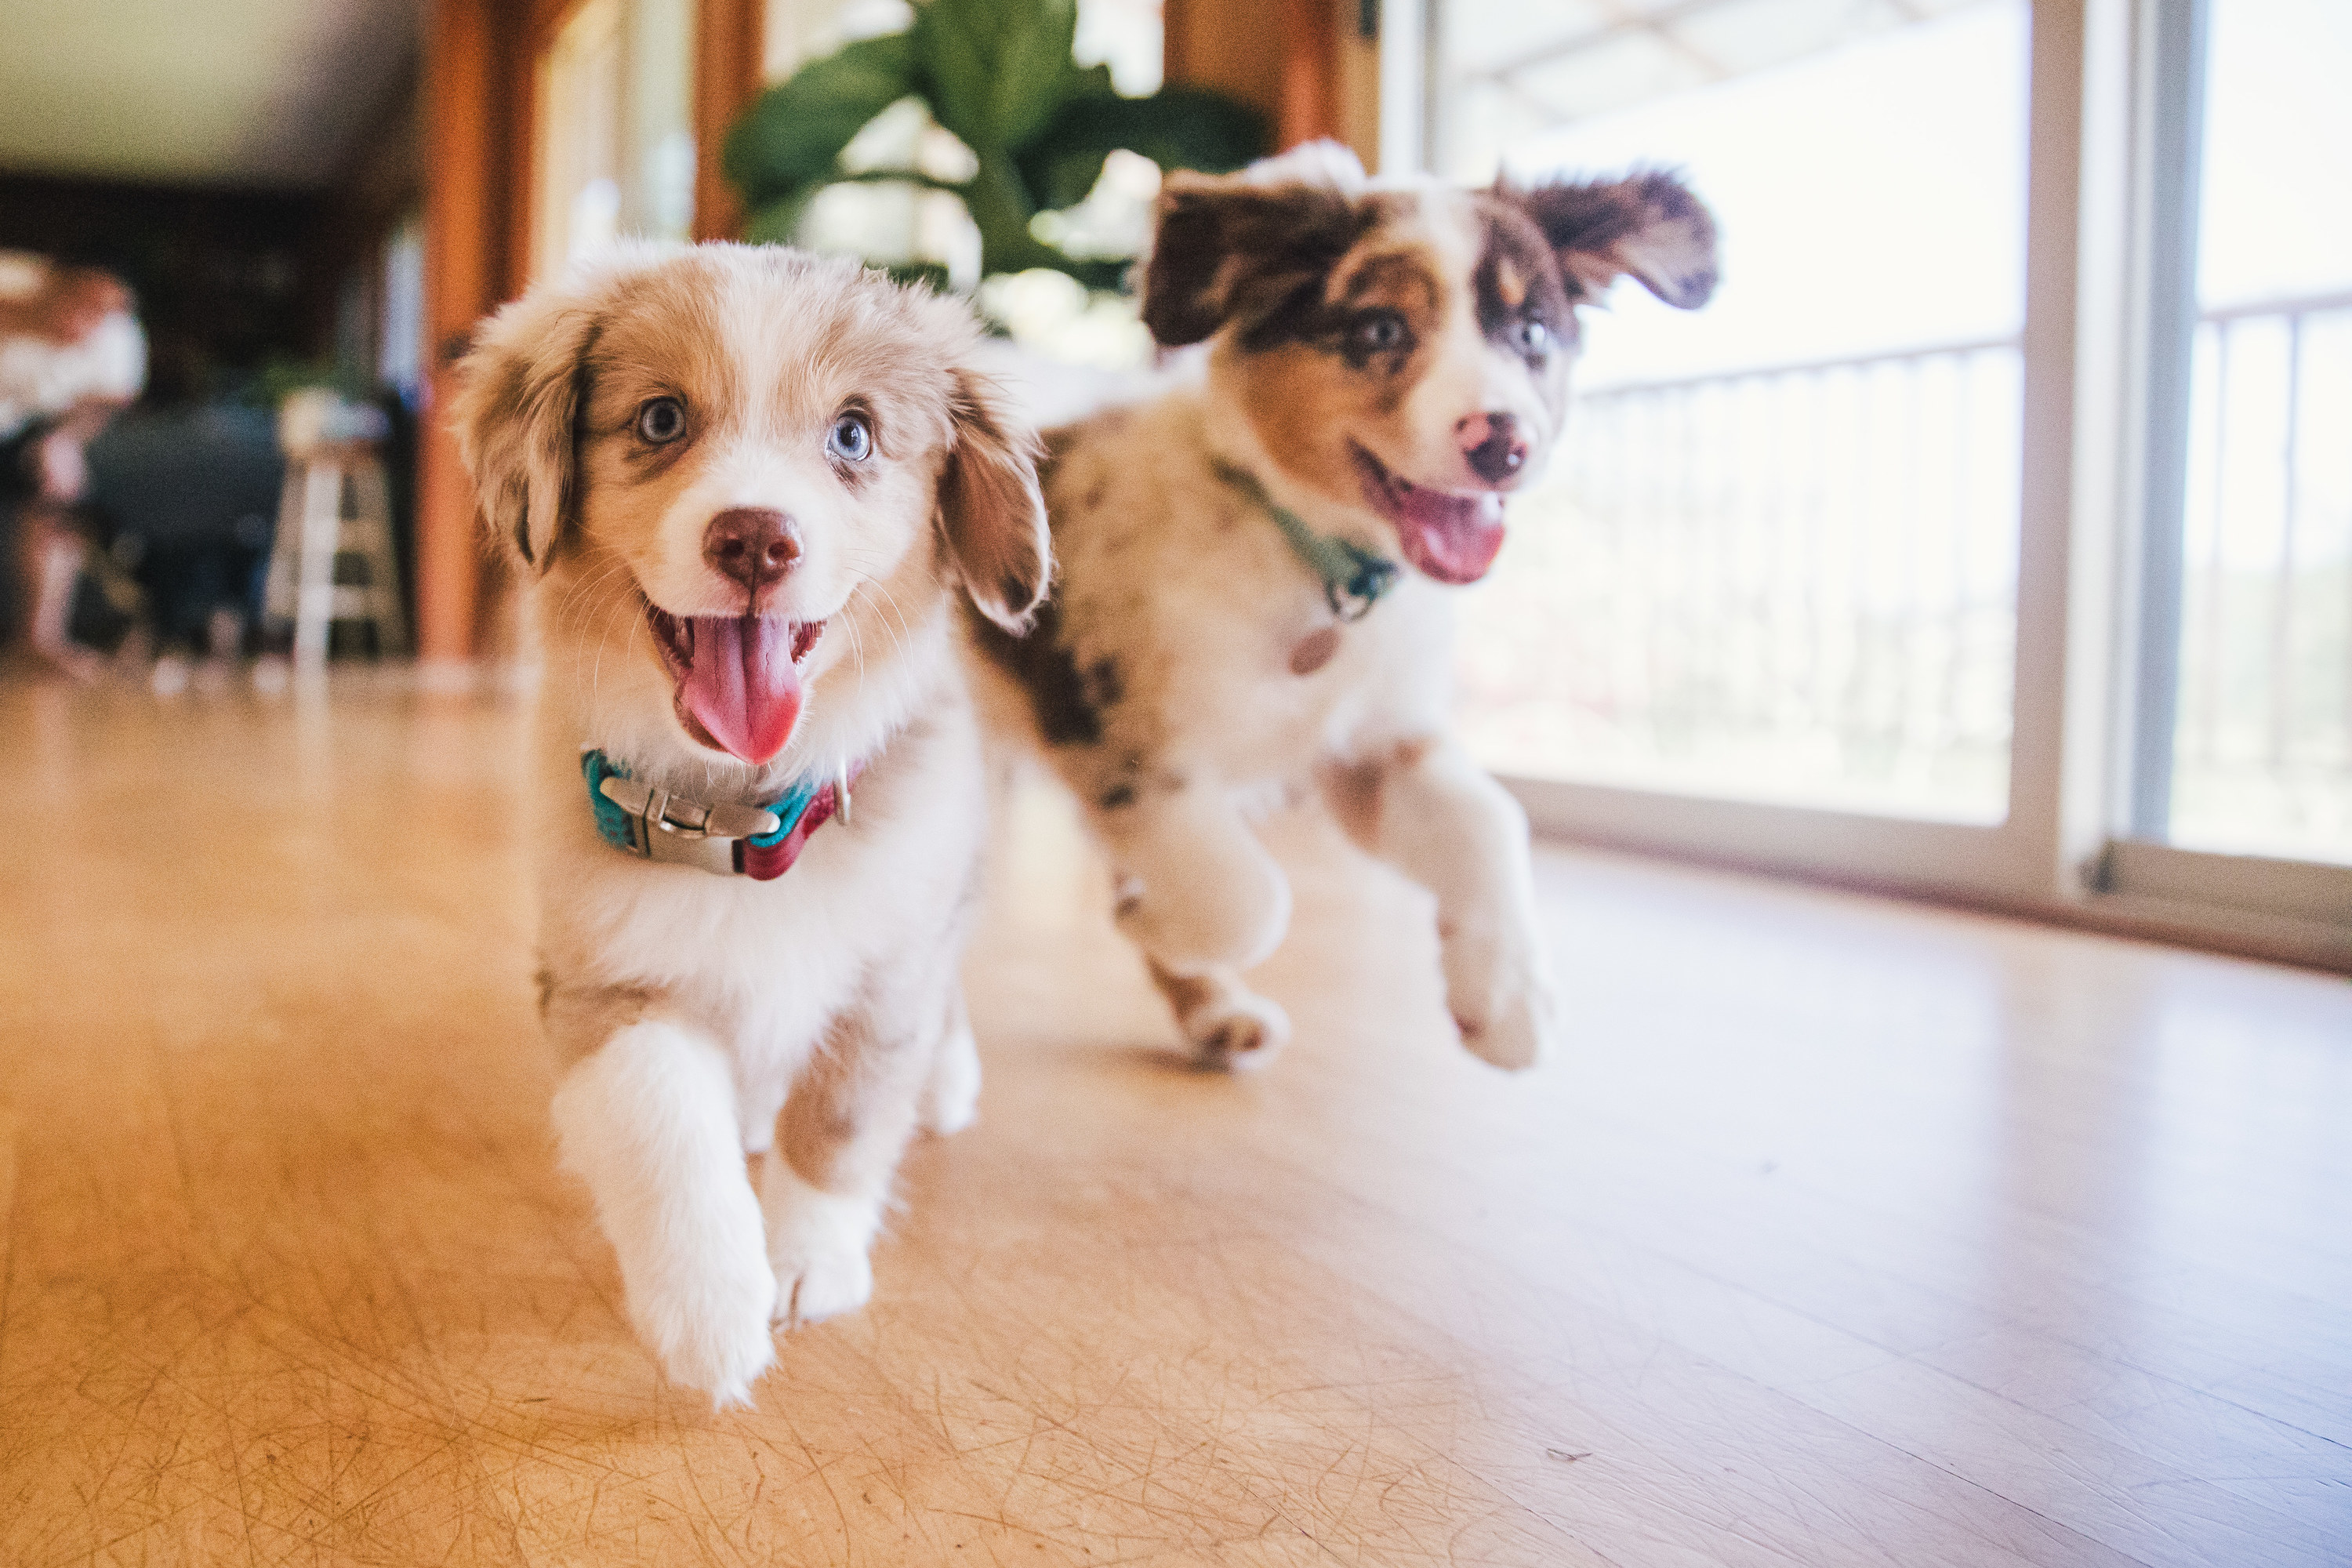 Two puppies running together